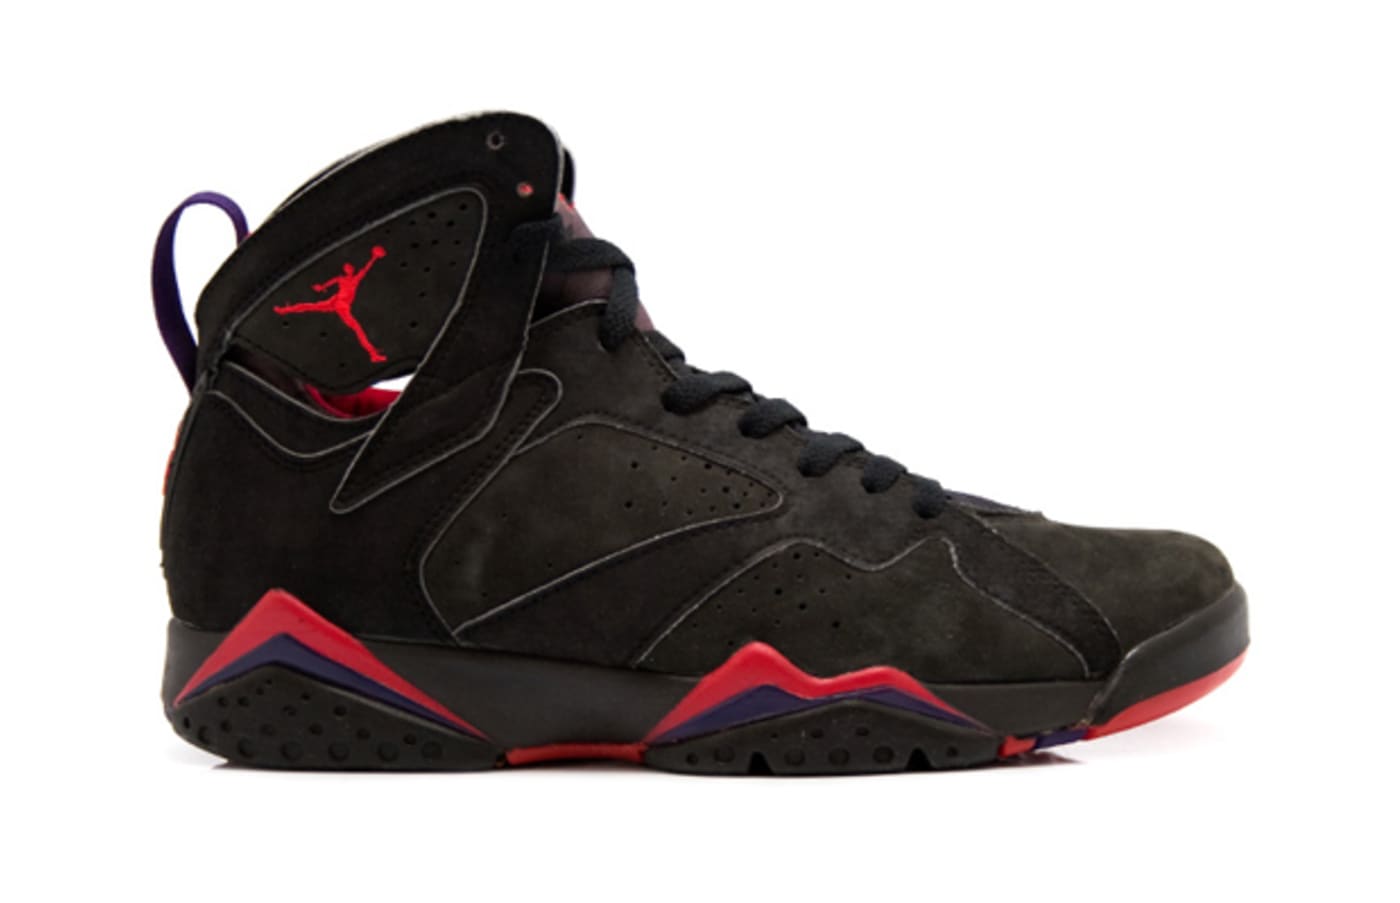 classic black and red jordans